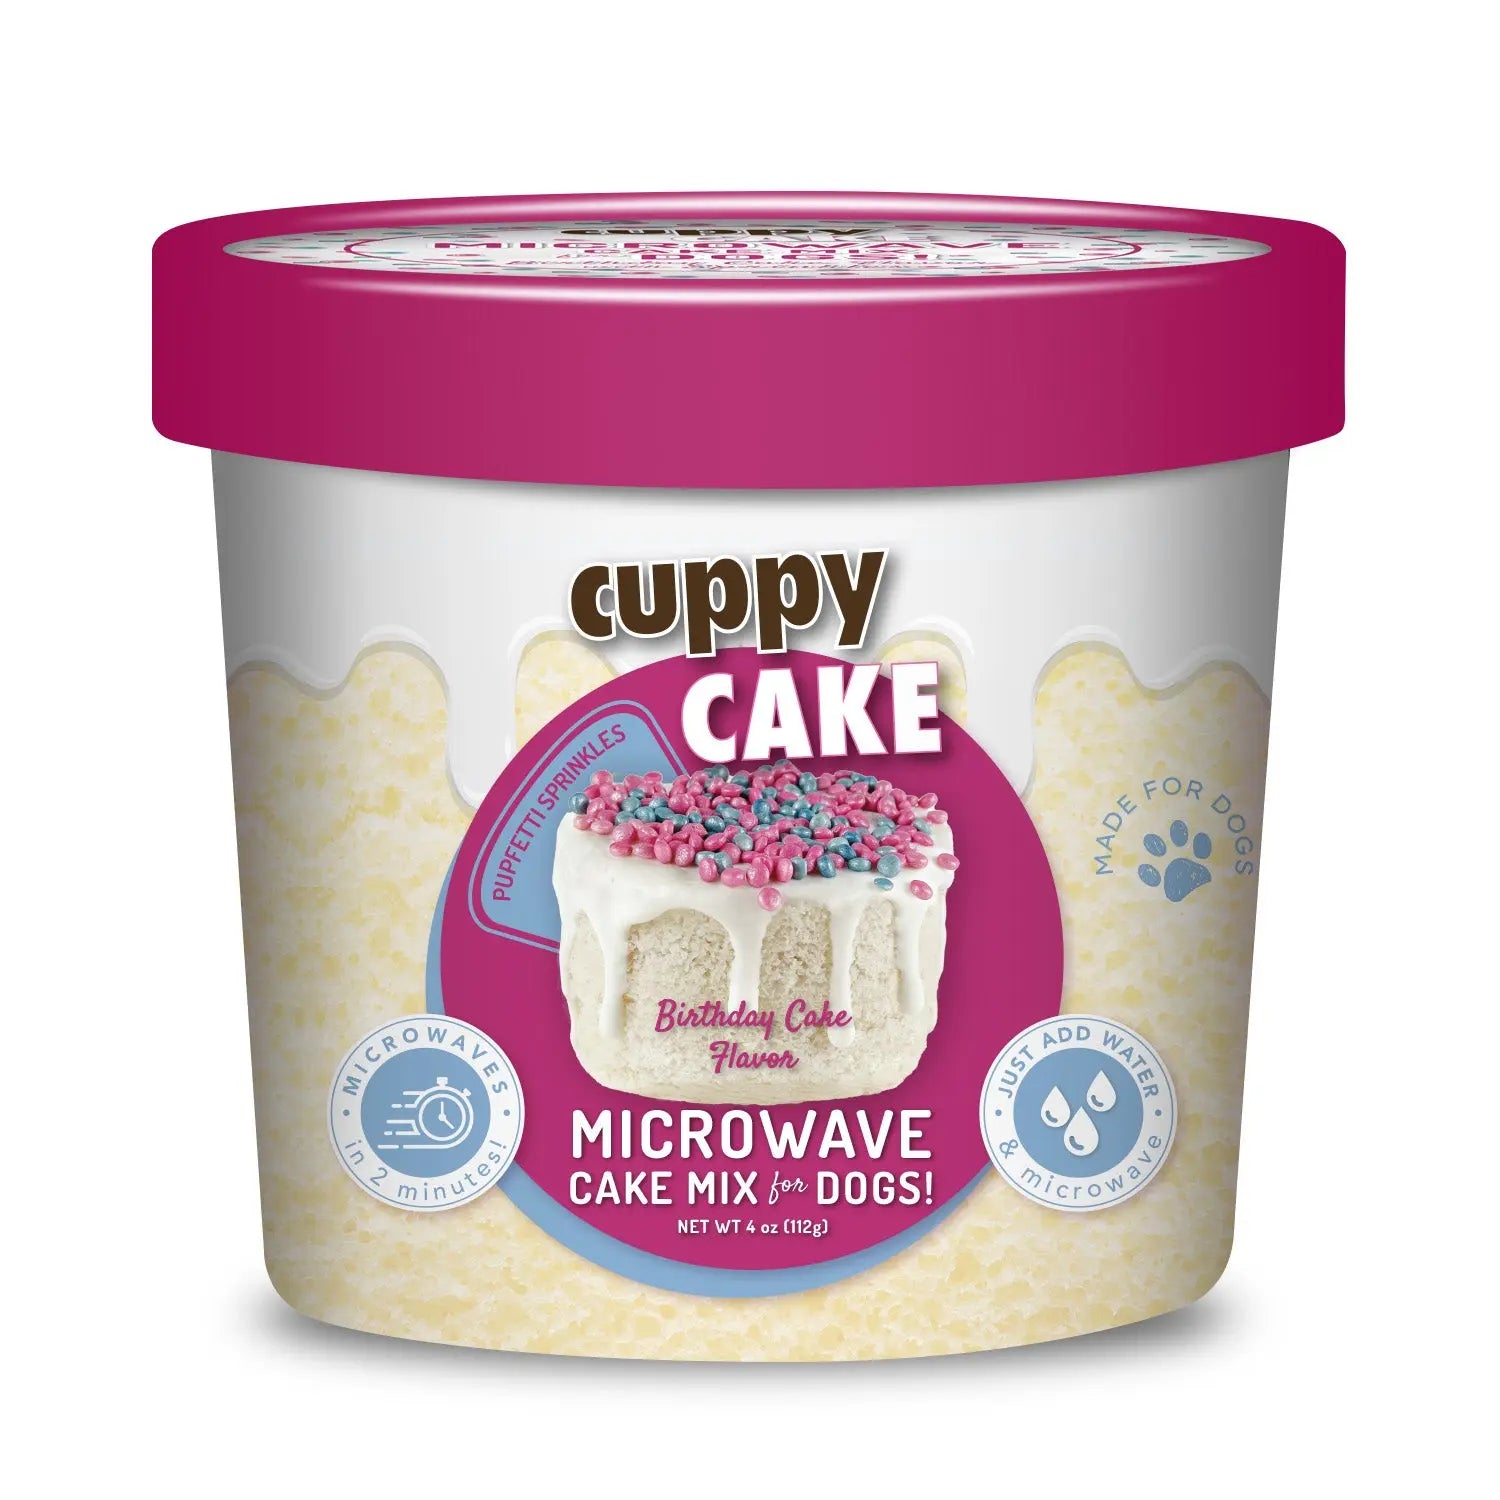 Cuppy Cake Microwave Cake in A Cup for Dogs Birthday Cake Flavored with Pupfetti Sprinkles Puppy Cake